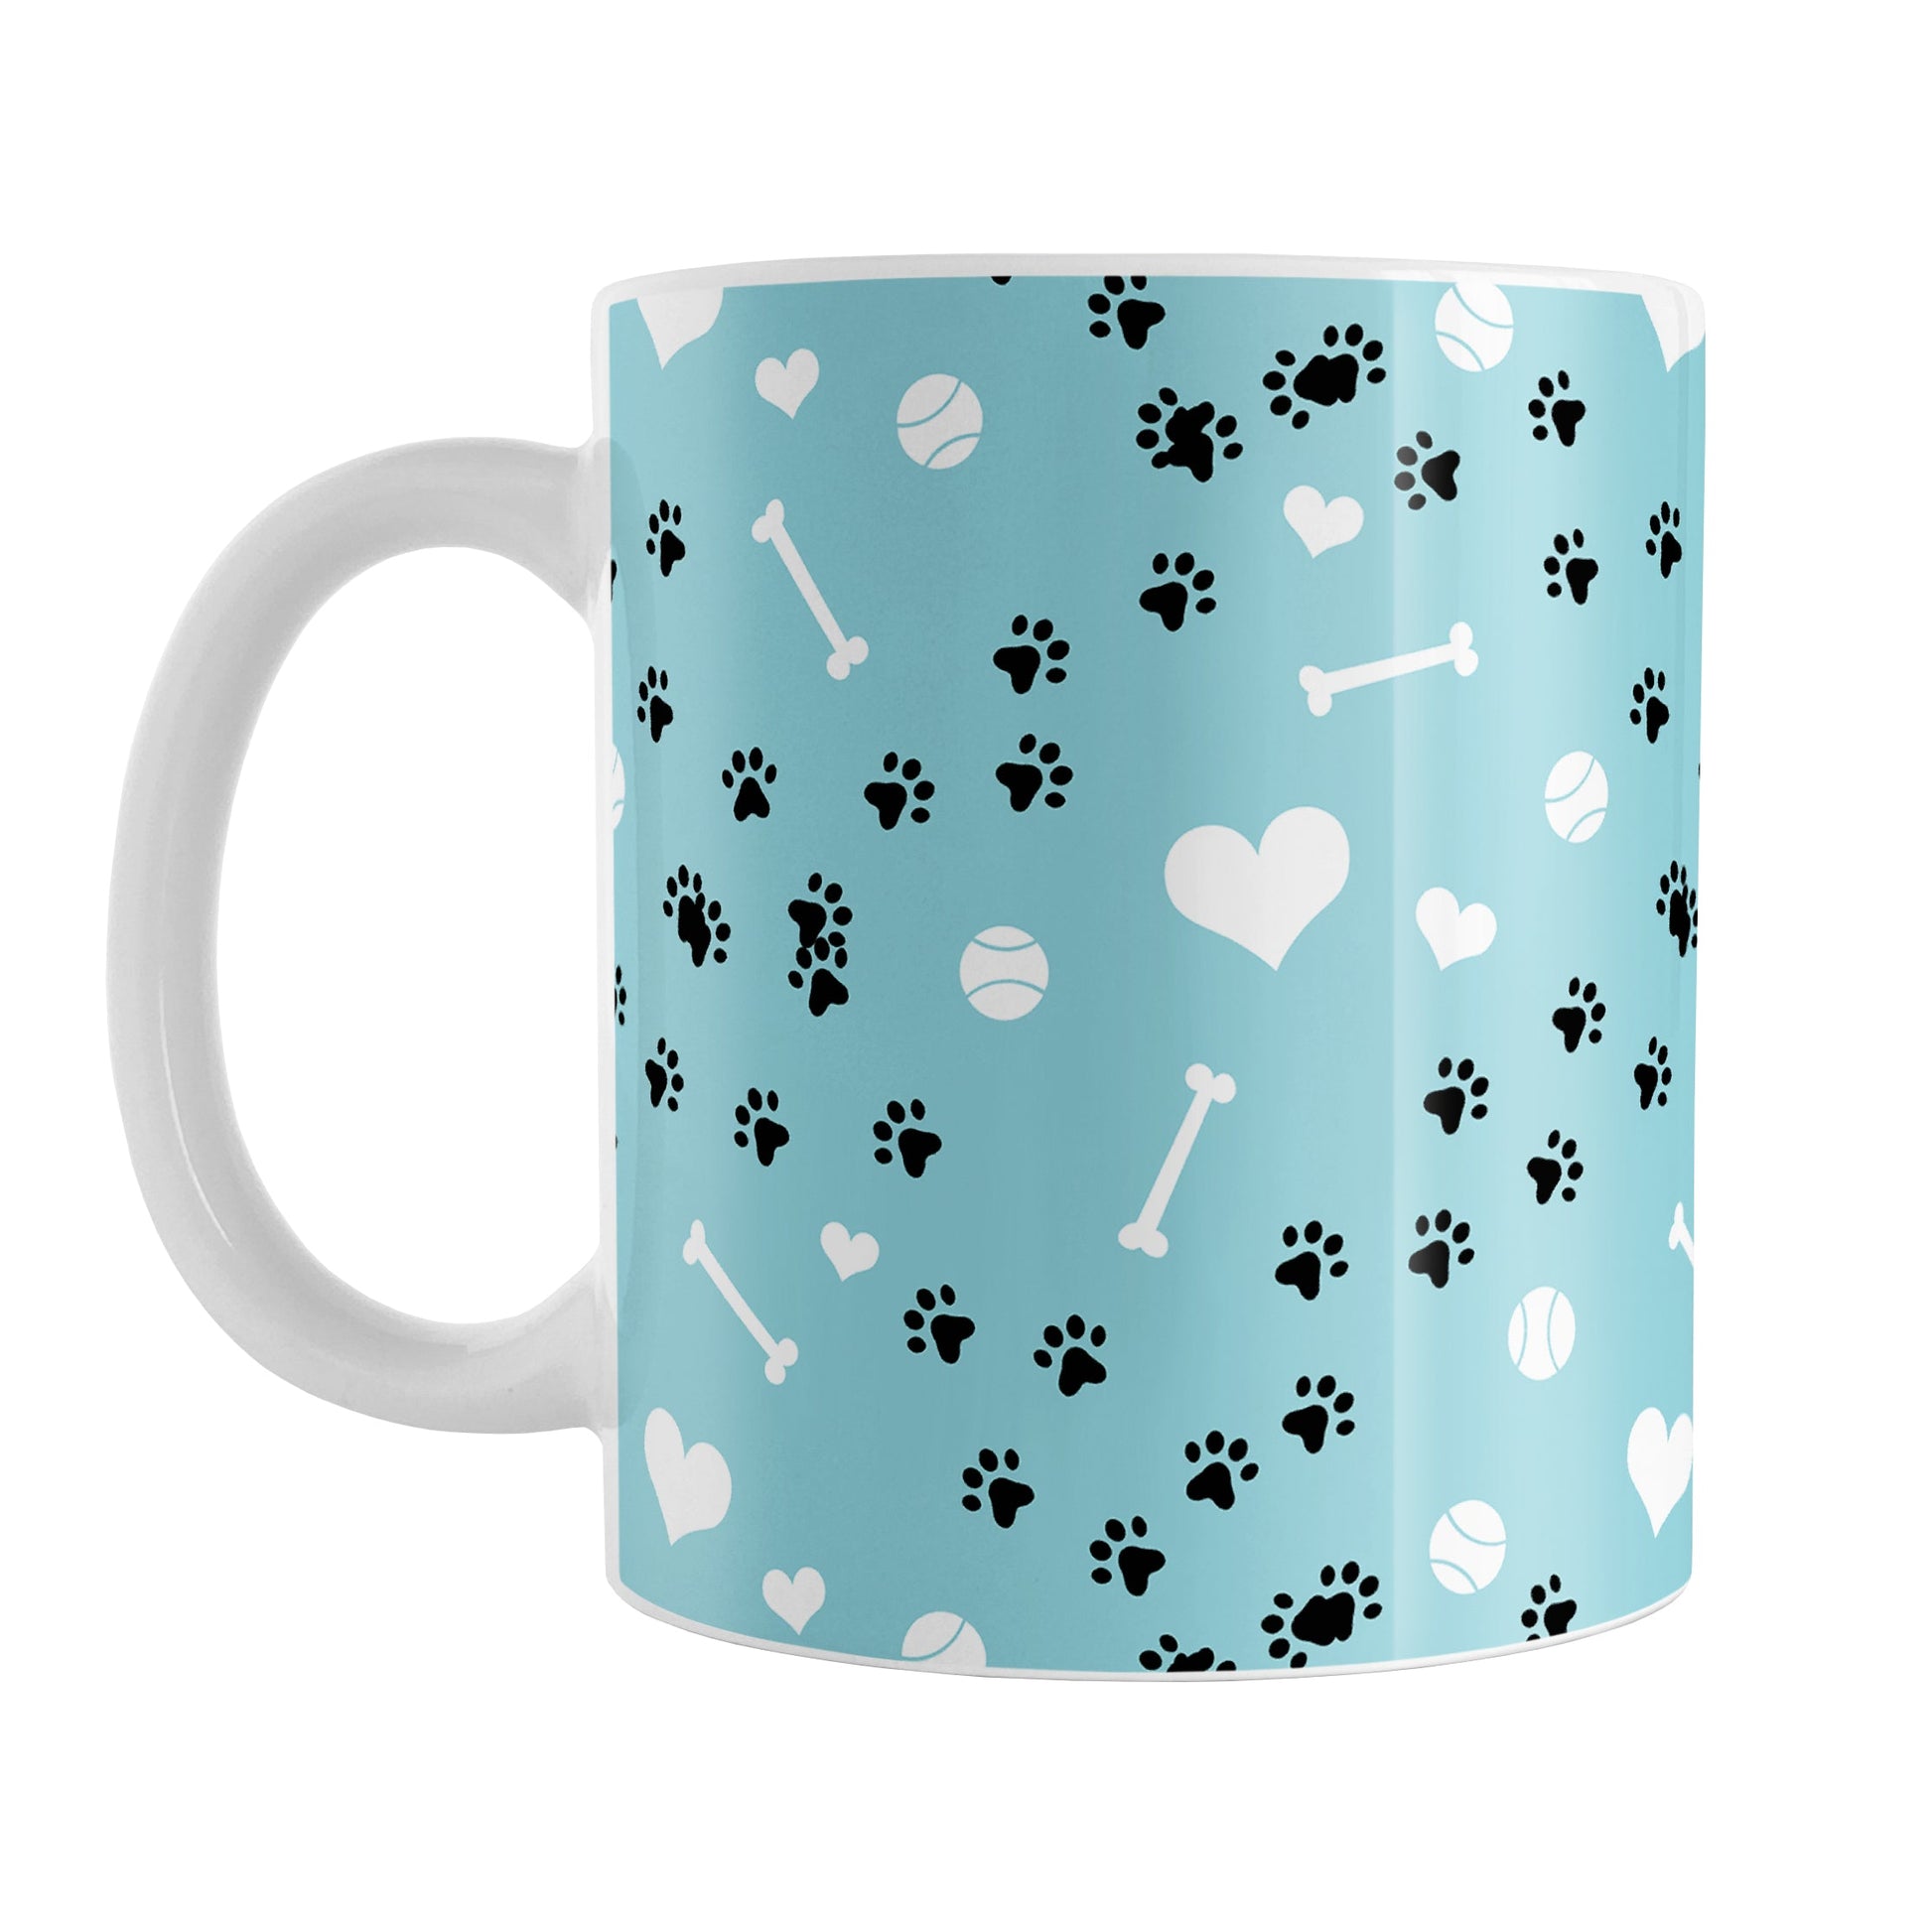 Puppy Run Blue Dog Mug (11oz) at Amy's Coffee Mugs. A ceramic coffee mug designed with a pattern of chaotic tracks of puppy paw prints running around the mug with white dog bones, balls, and hearts over a light blue background. This mug is perfect for people who love the chaotic play of puppies, love dogs, and like blue mugs. 